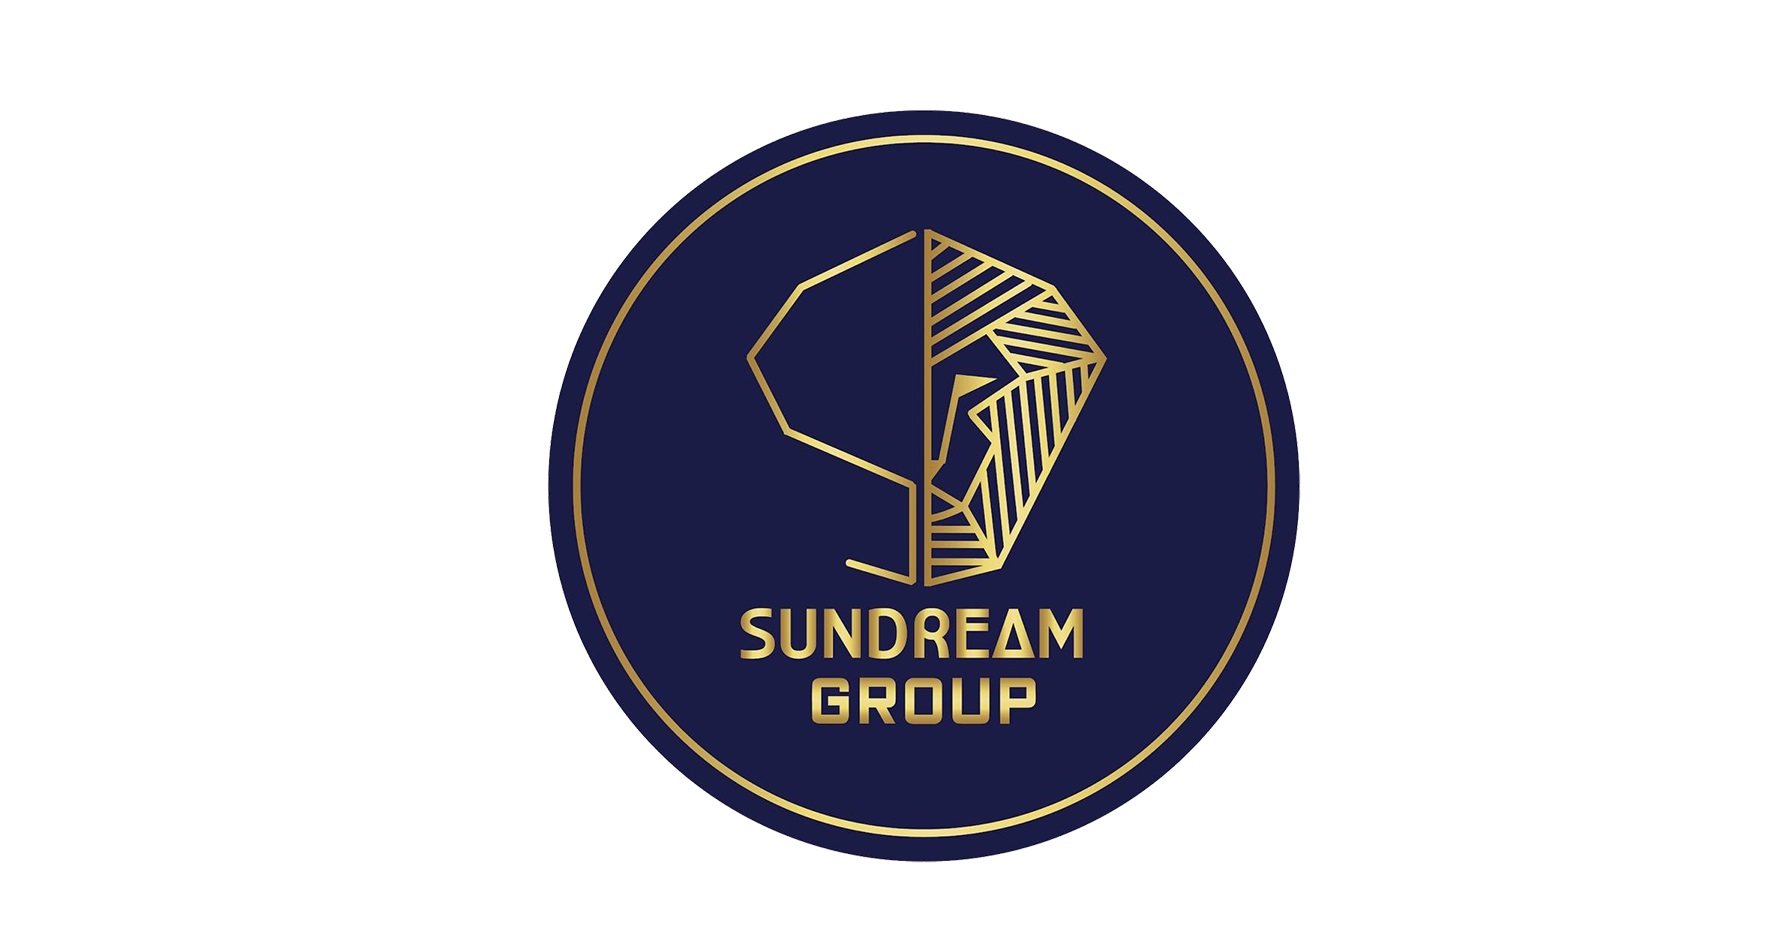 Sundream Group To Invest 250 Cr For Anthurium Business Park In FY 24-25